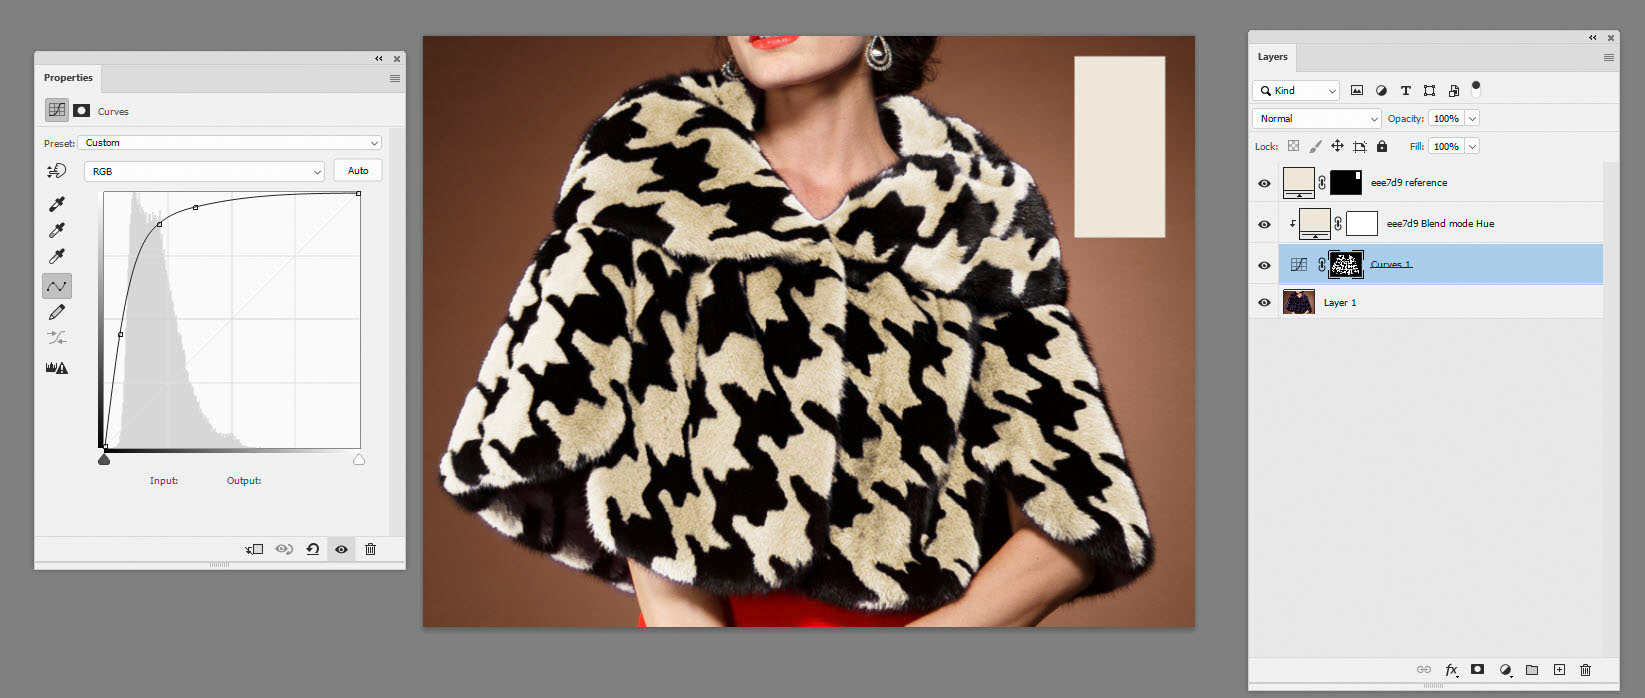 How to Make Houndstooth Pattern 